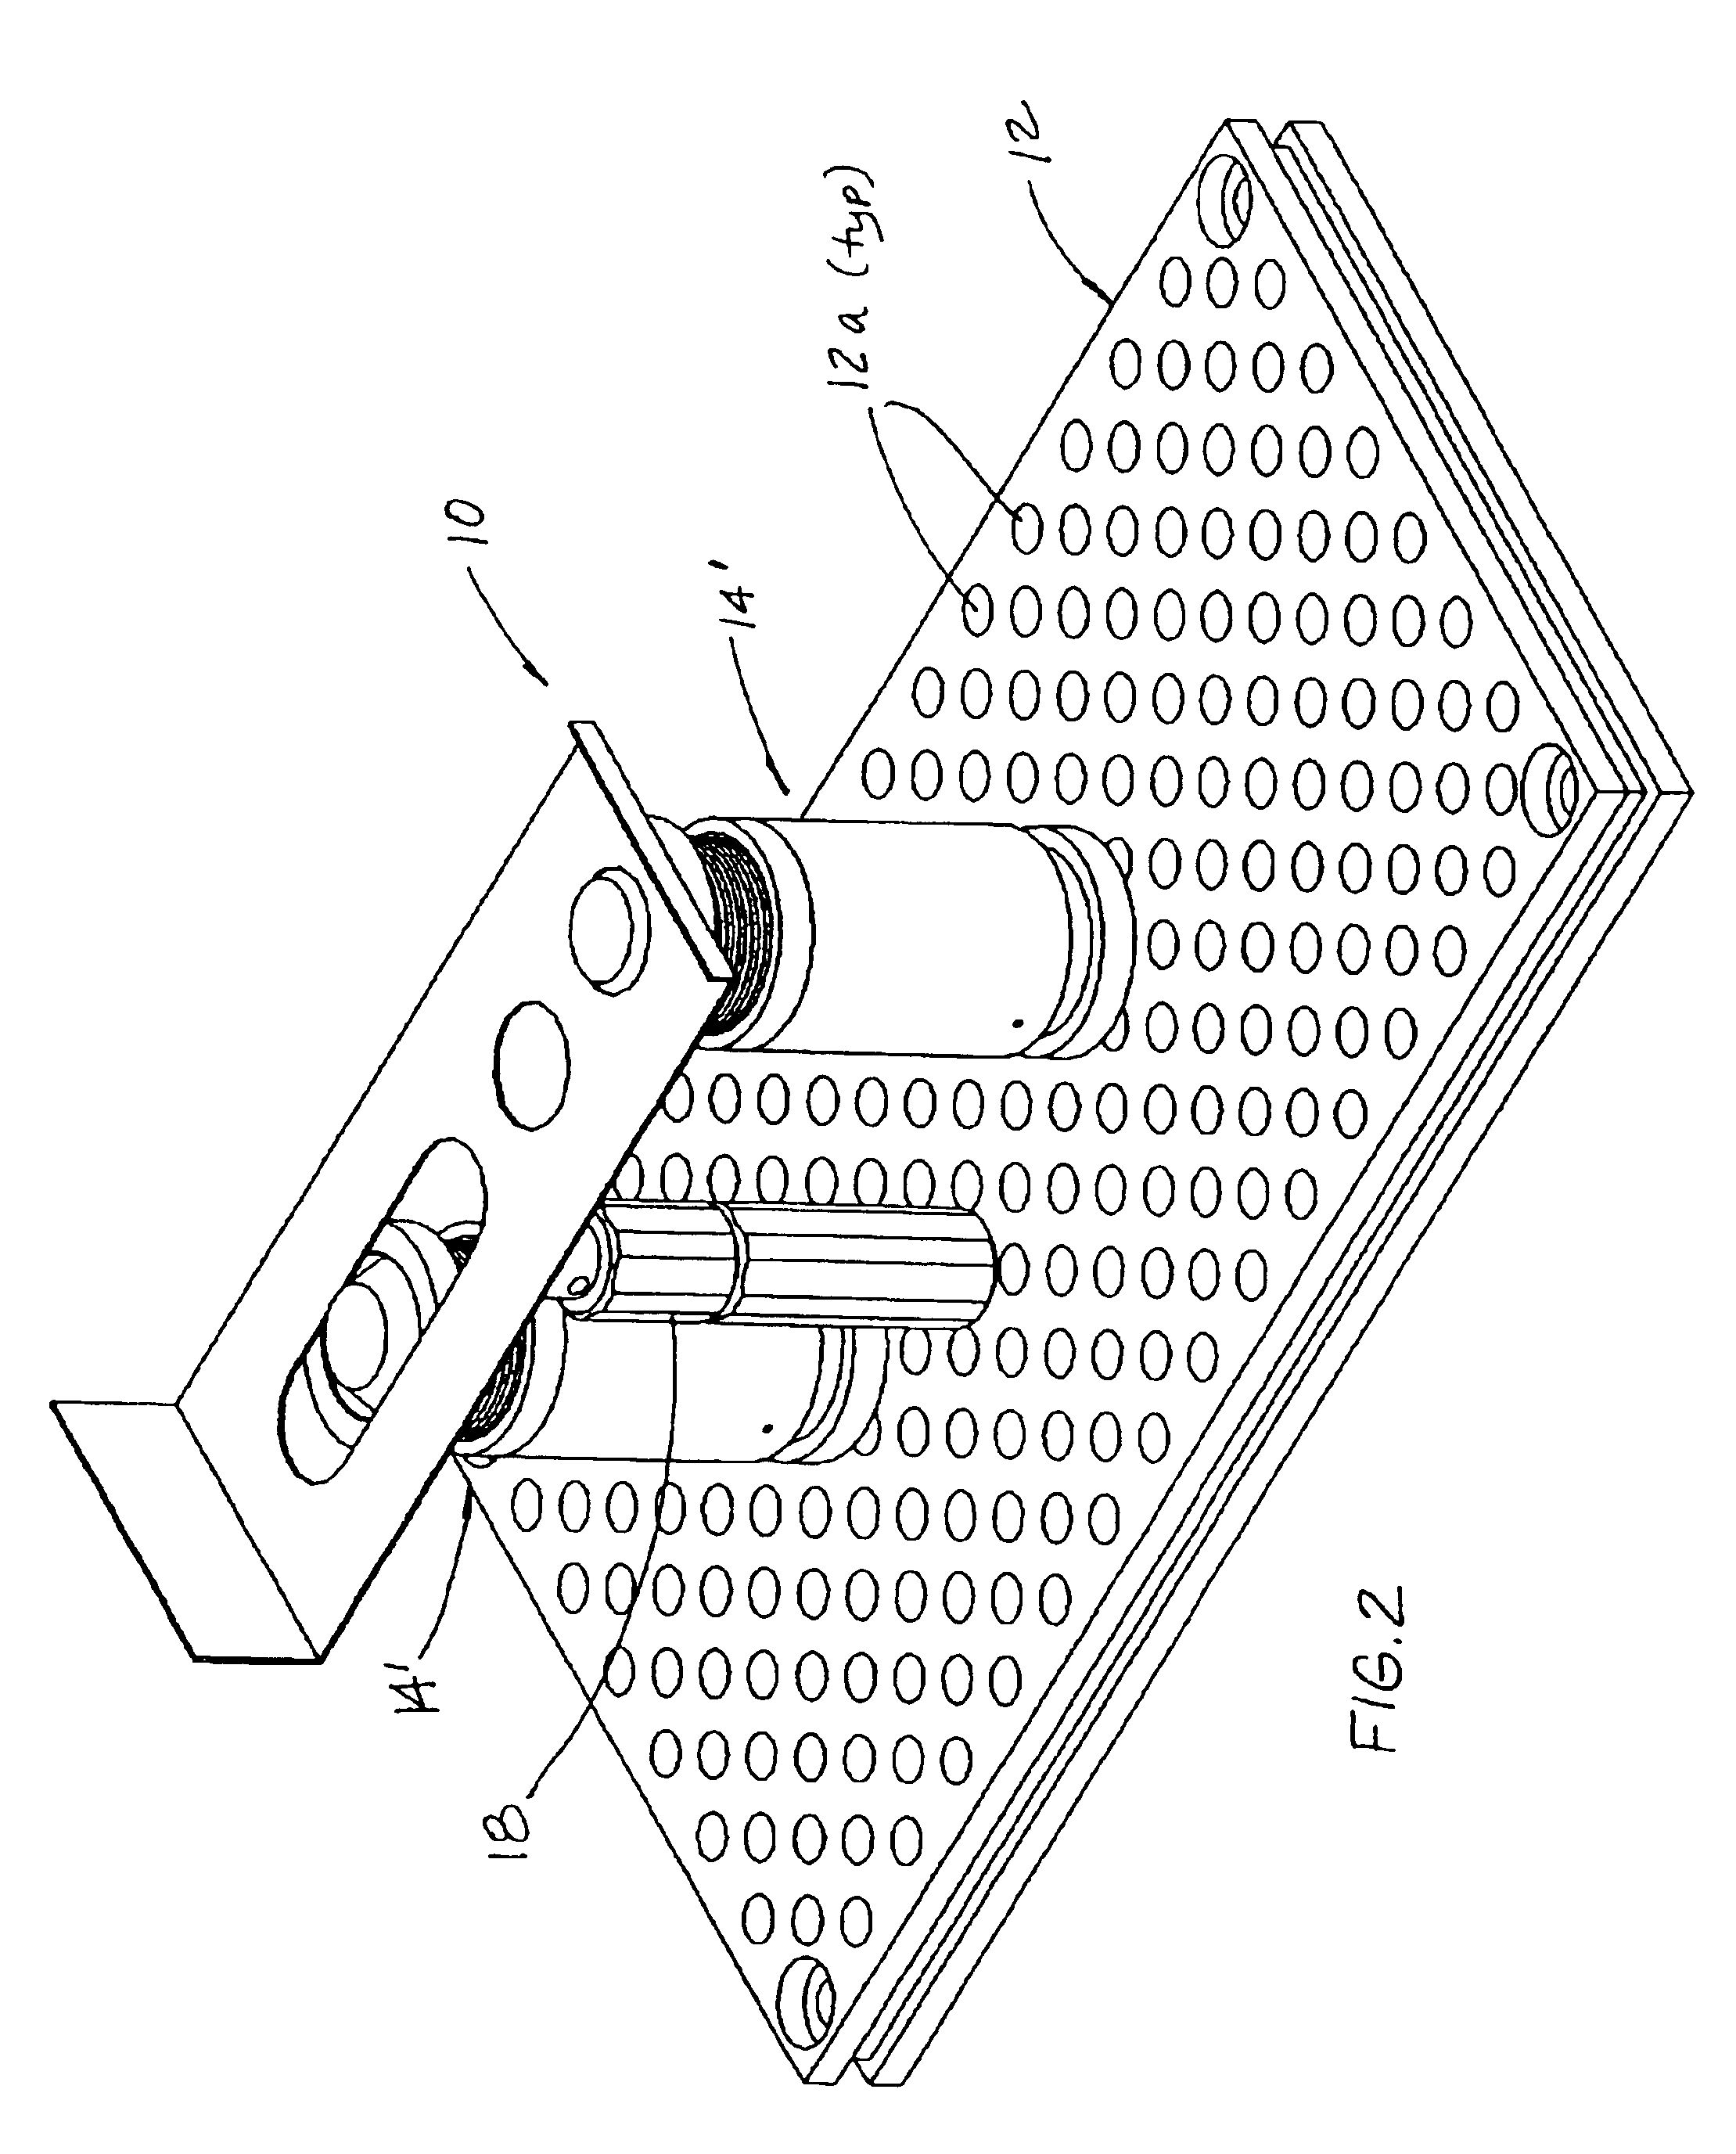 Modular tooling apparatus with tapered locater system